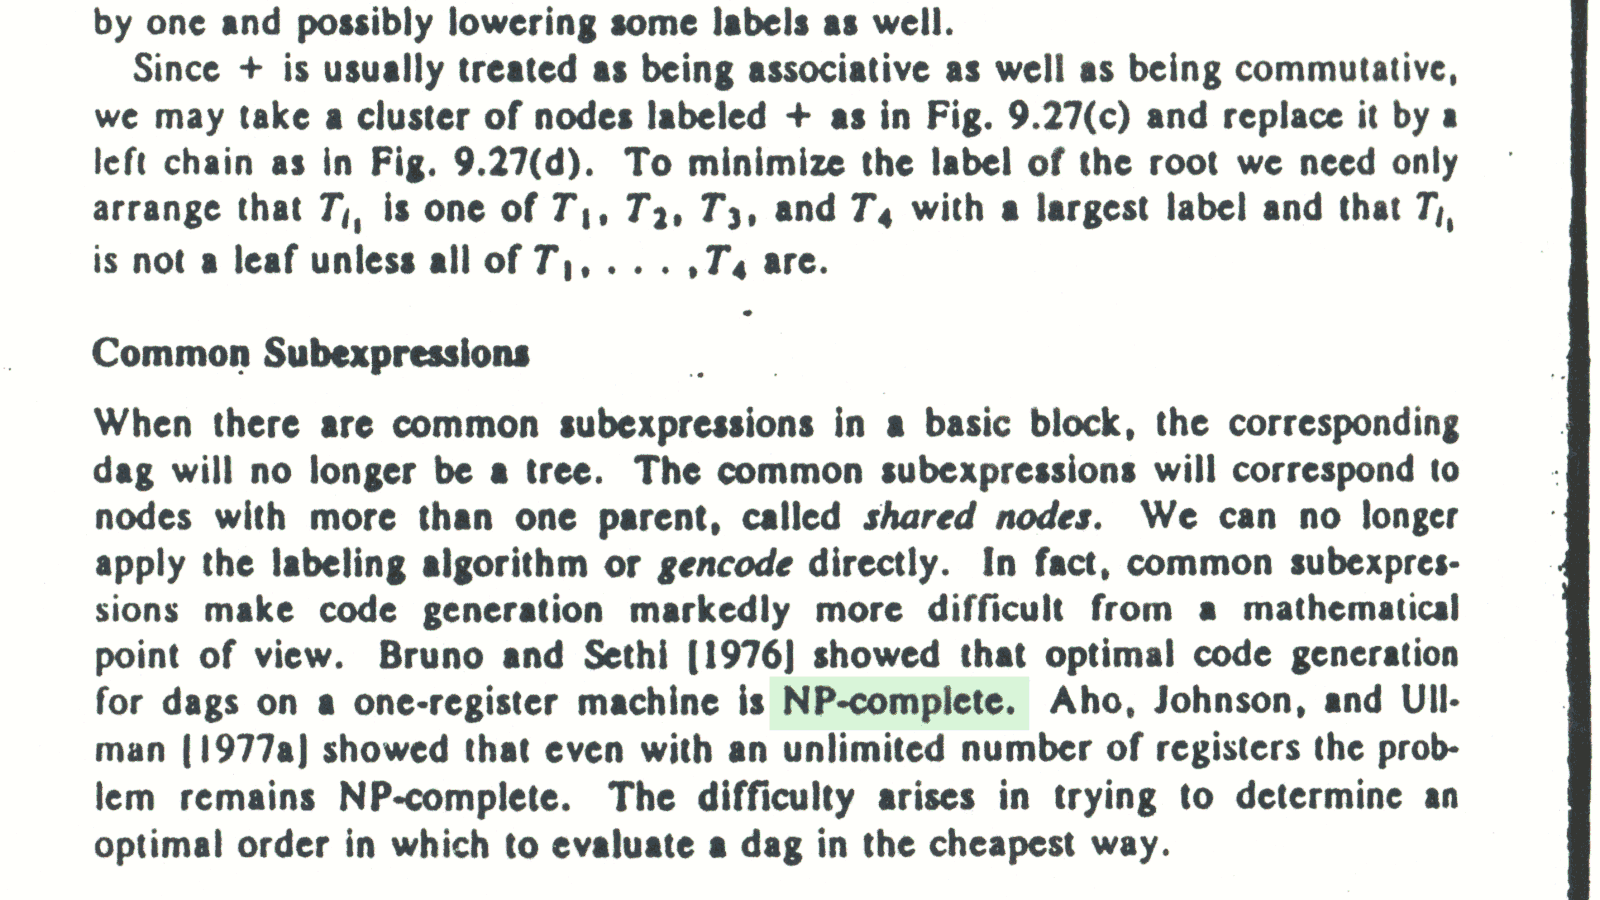 Aho, Johnson and Ullman showed that even with an unlimited number of registers the problem remains NP-complete.